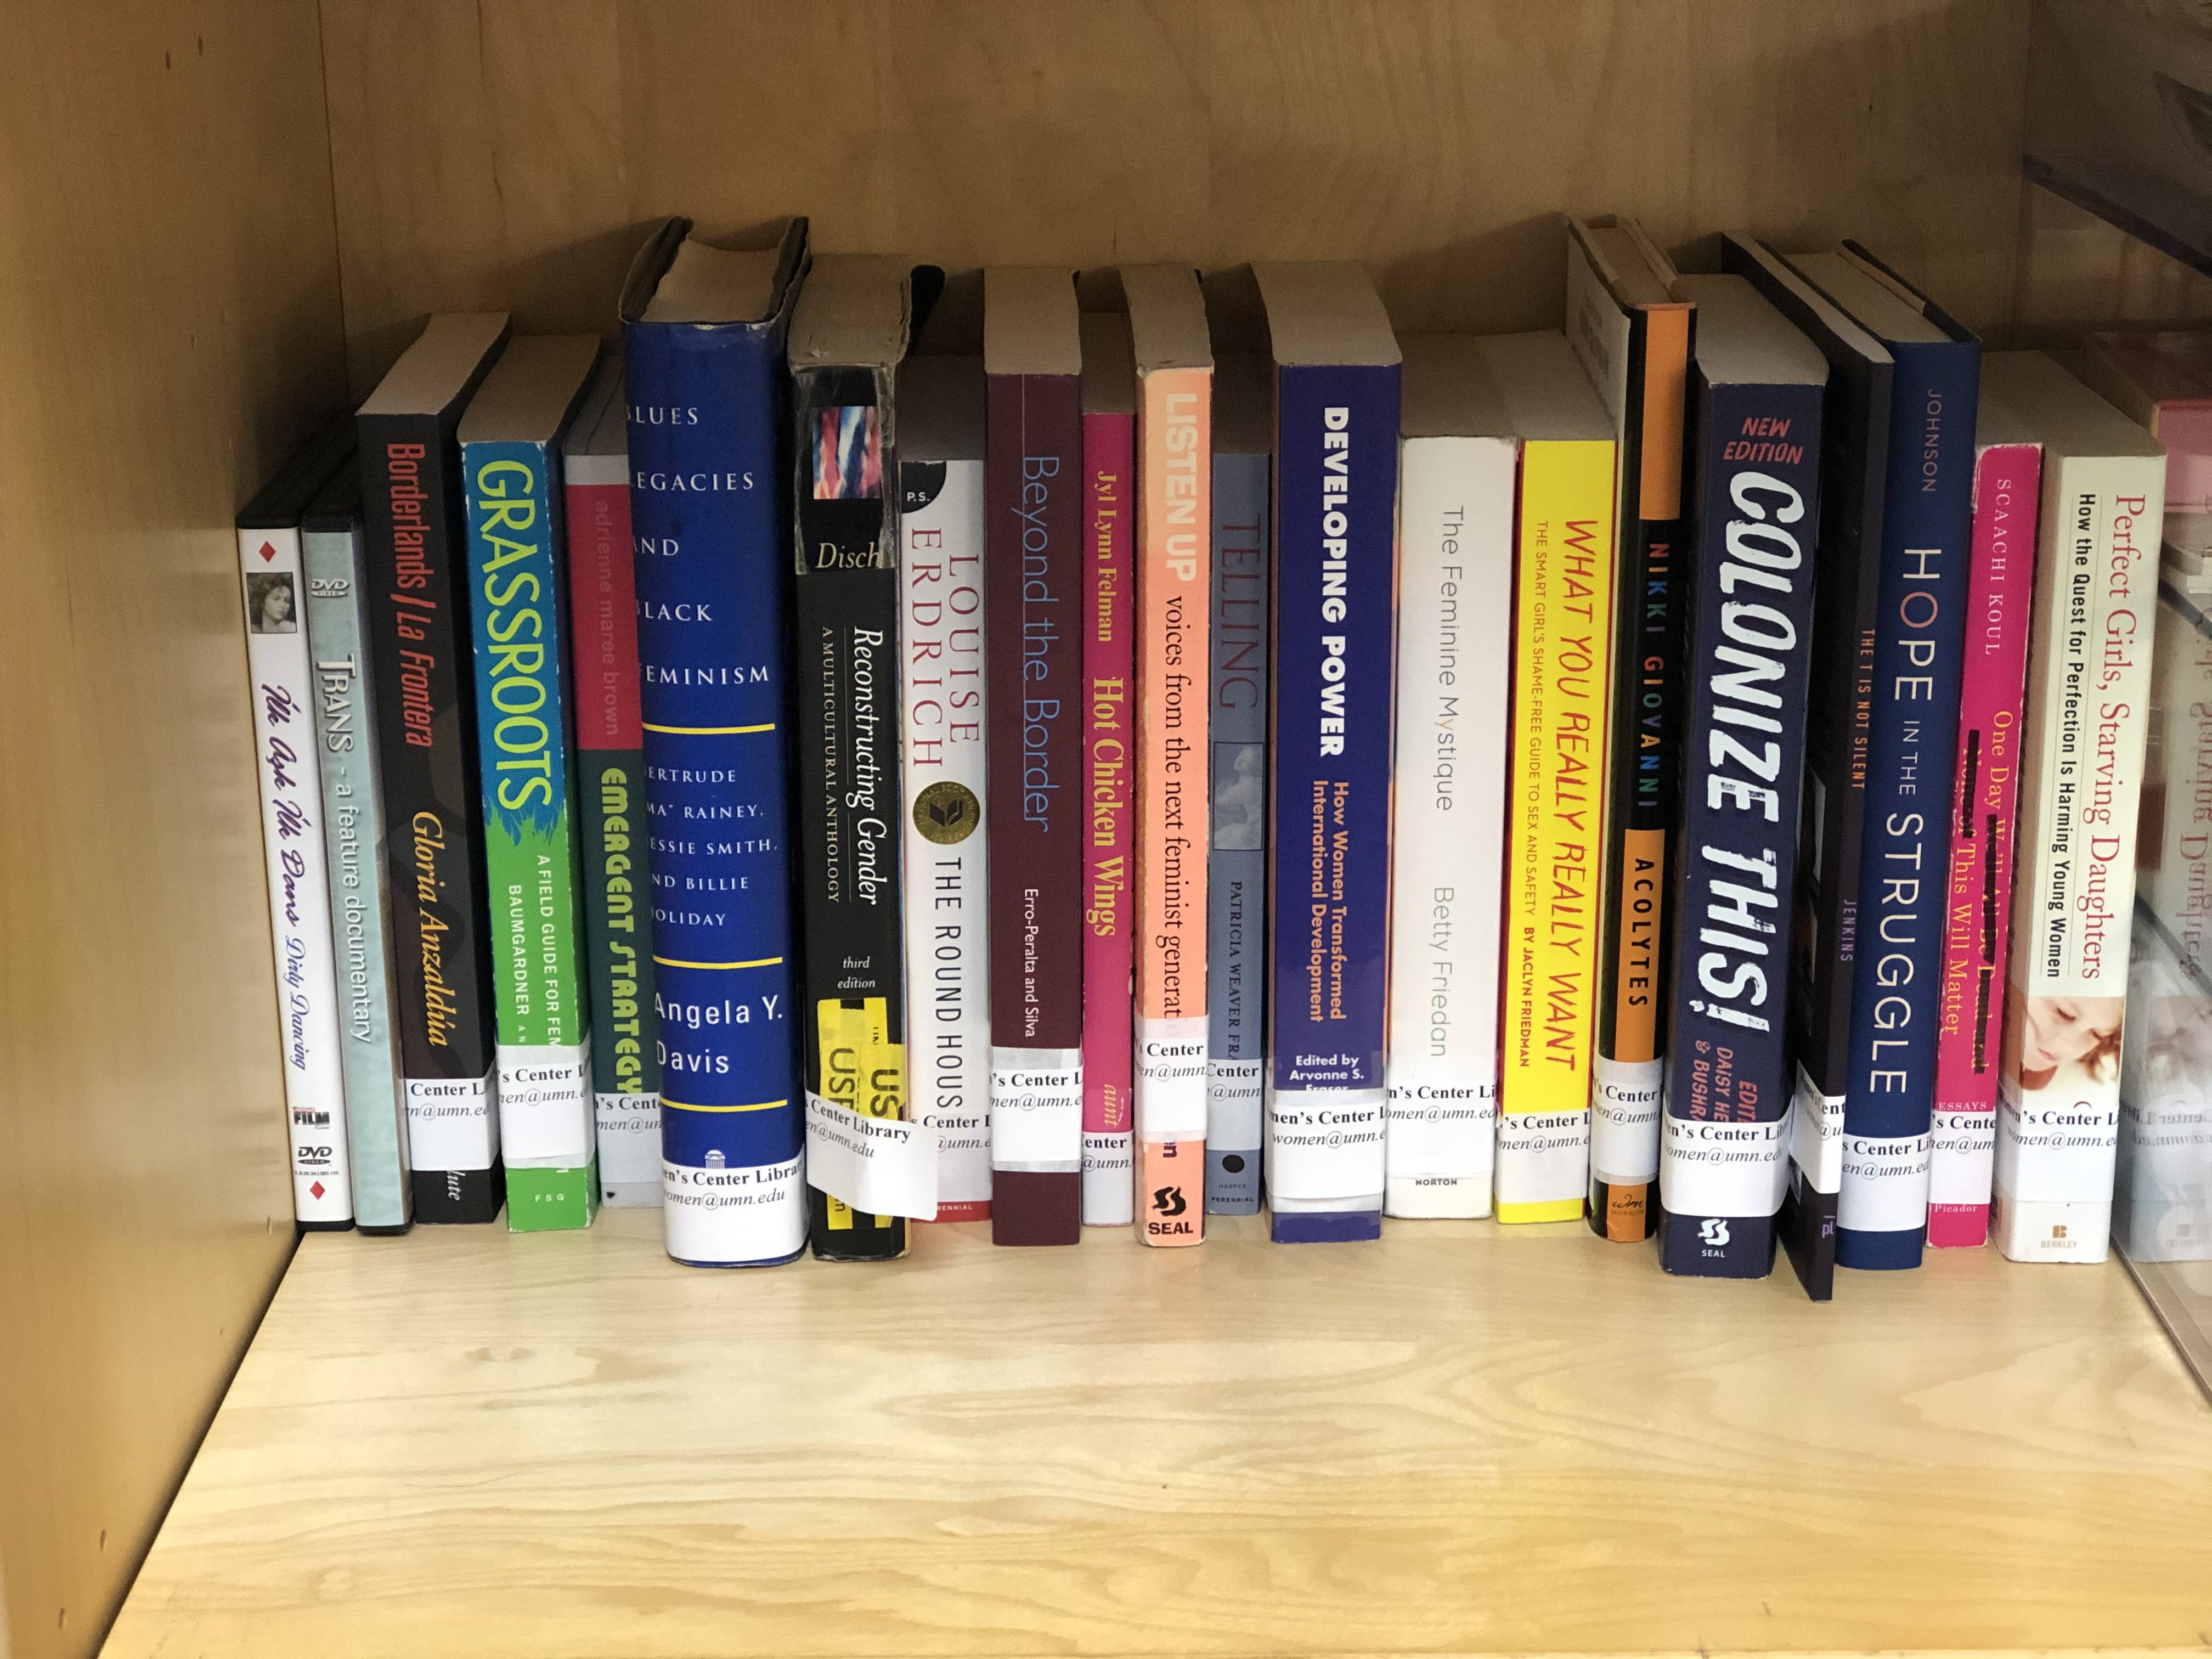 A row of books on a shelf in the Women's Center Library.